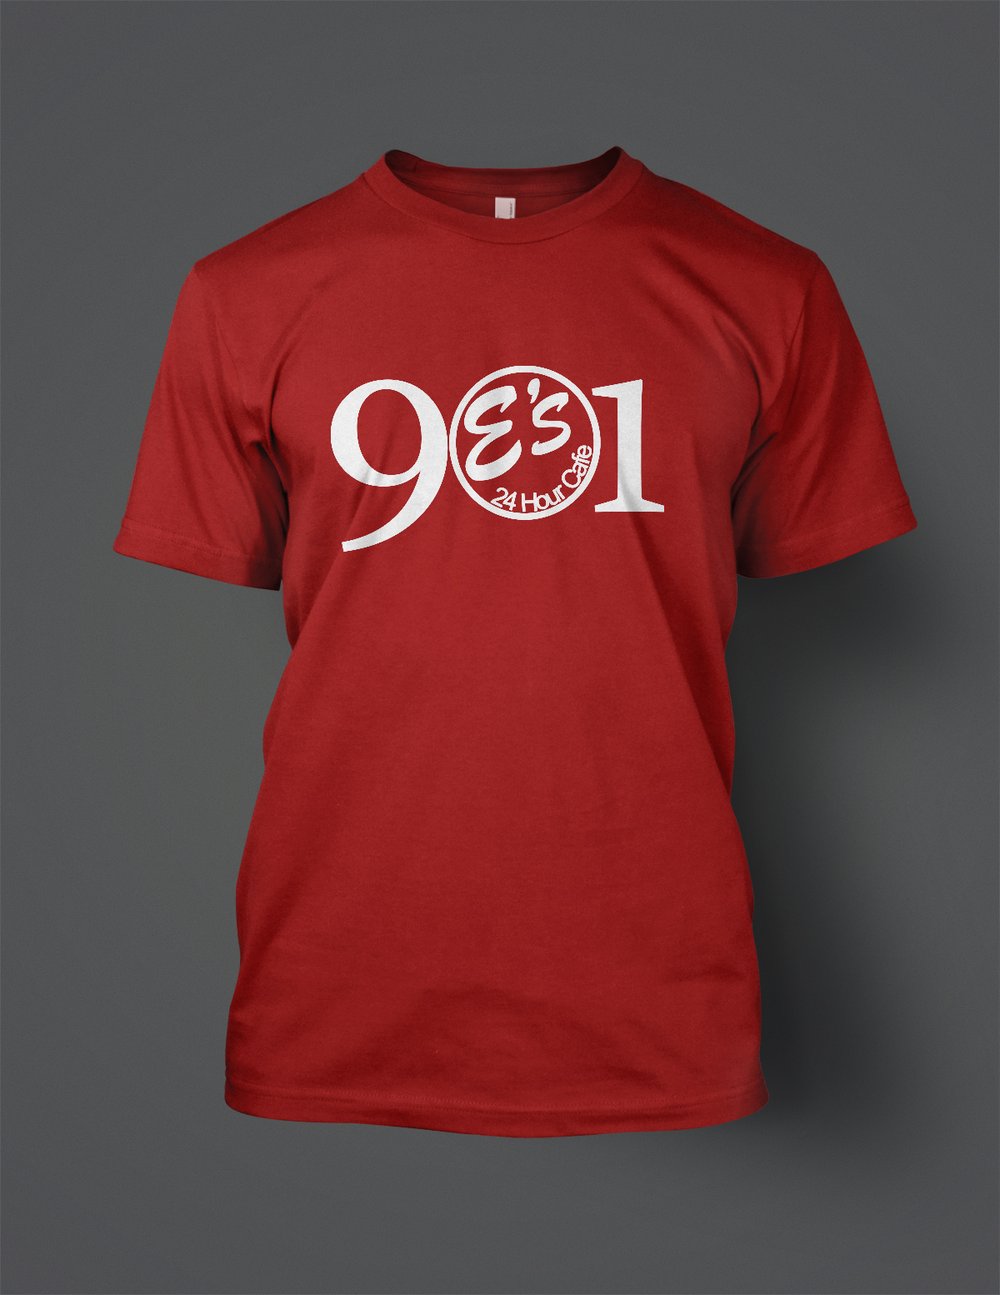 Image of Red 901 E's tee